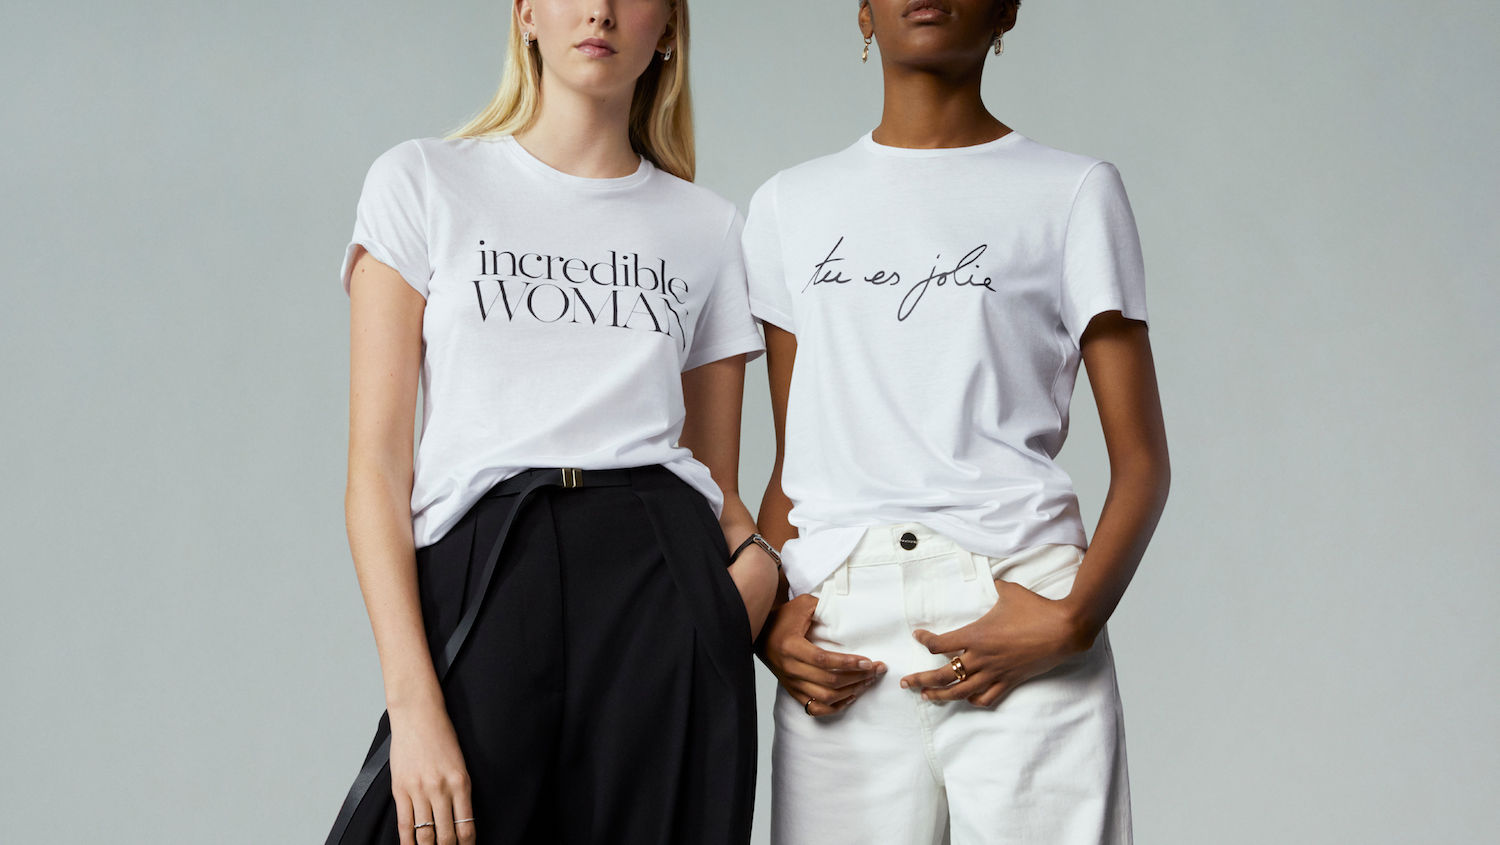 Net-A-Porter Celebrates IWD with T-shirts by top 20 female designers